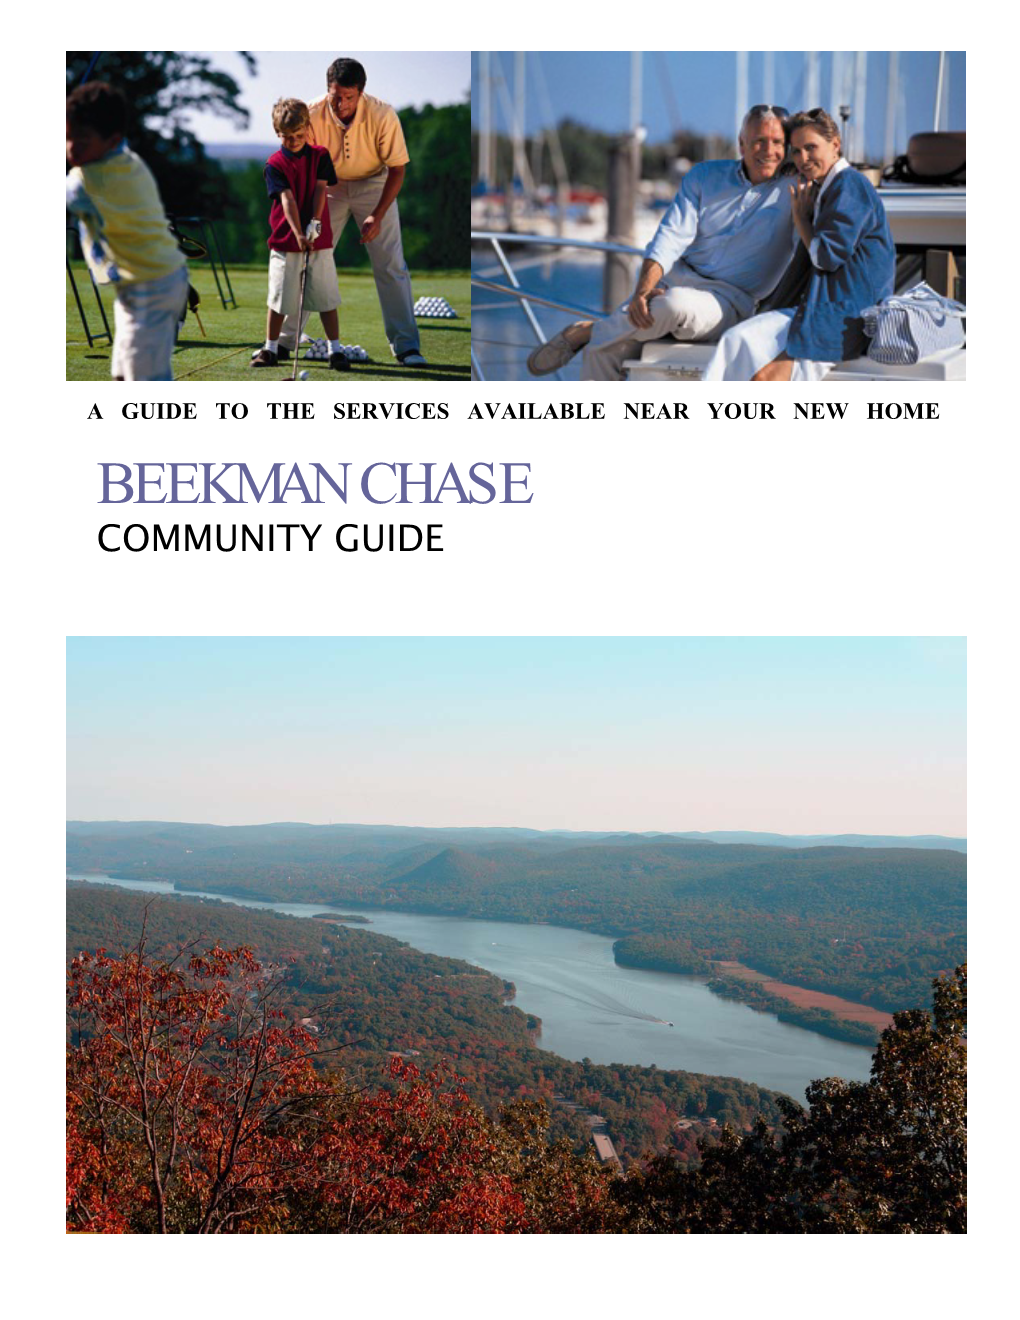 Beekman Chase Community Guide